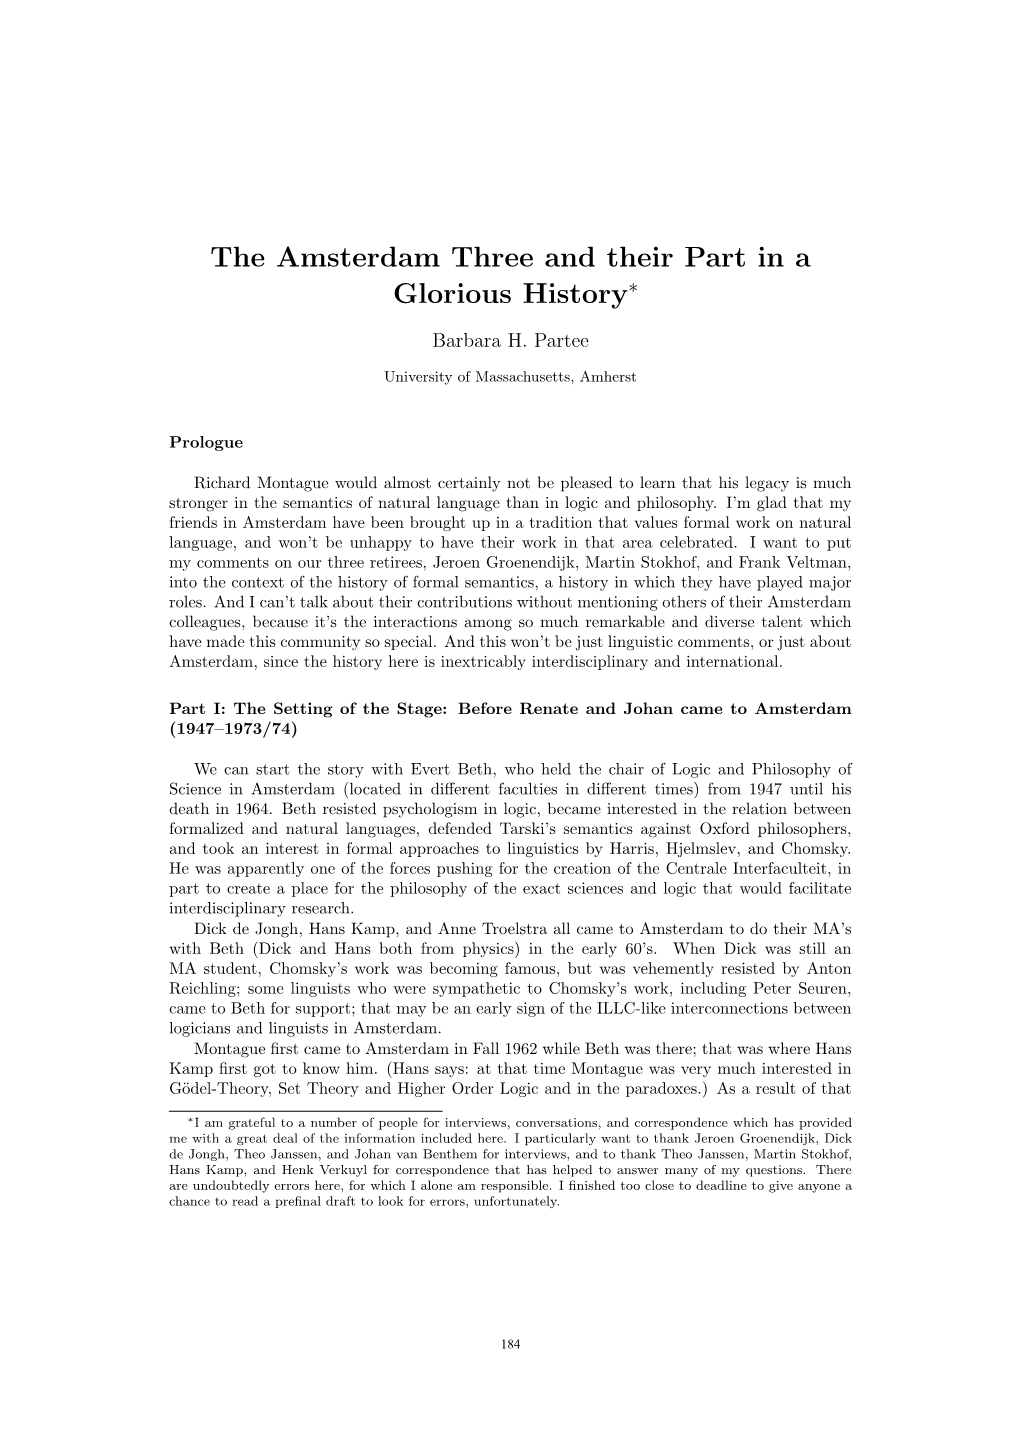 The Amsterdam Three and Their Part in a Glorious History⇤